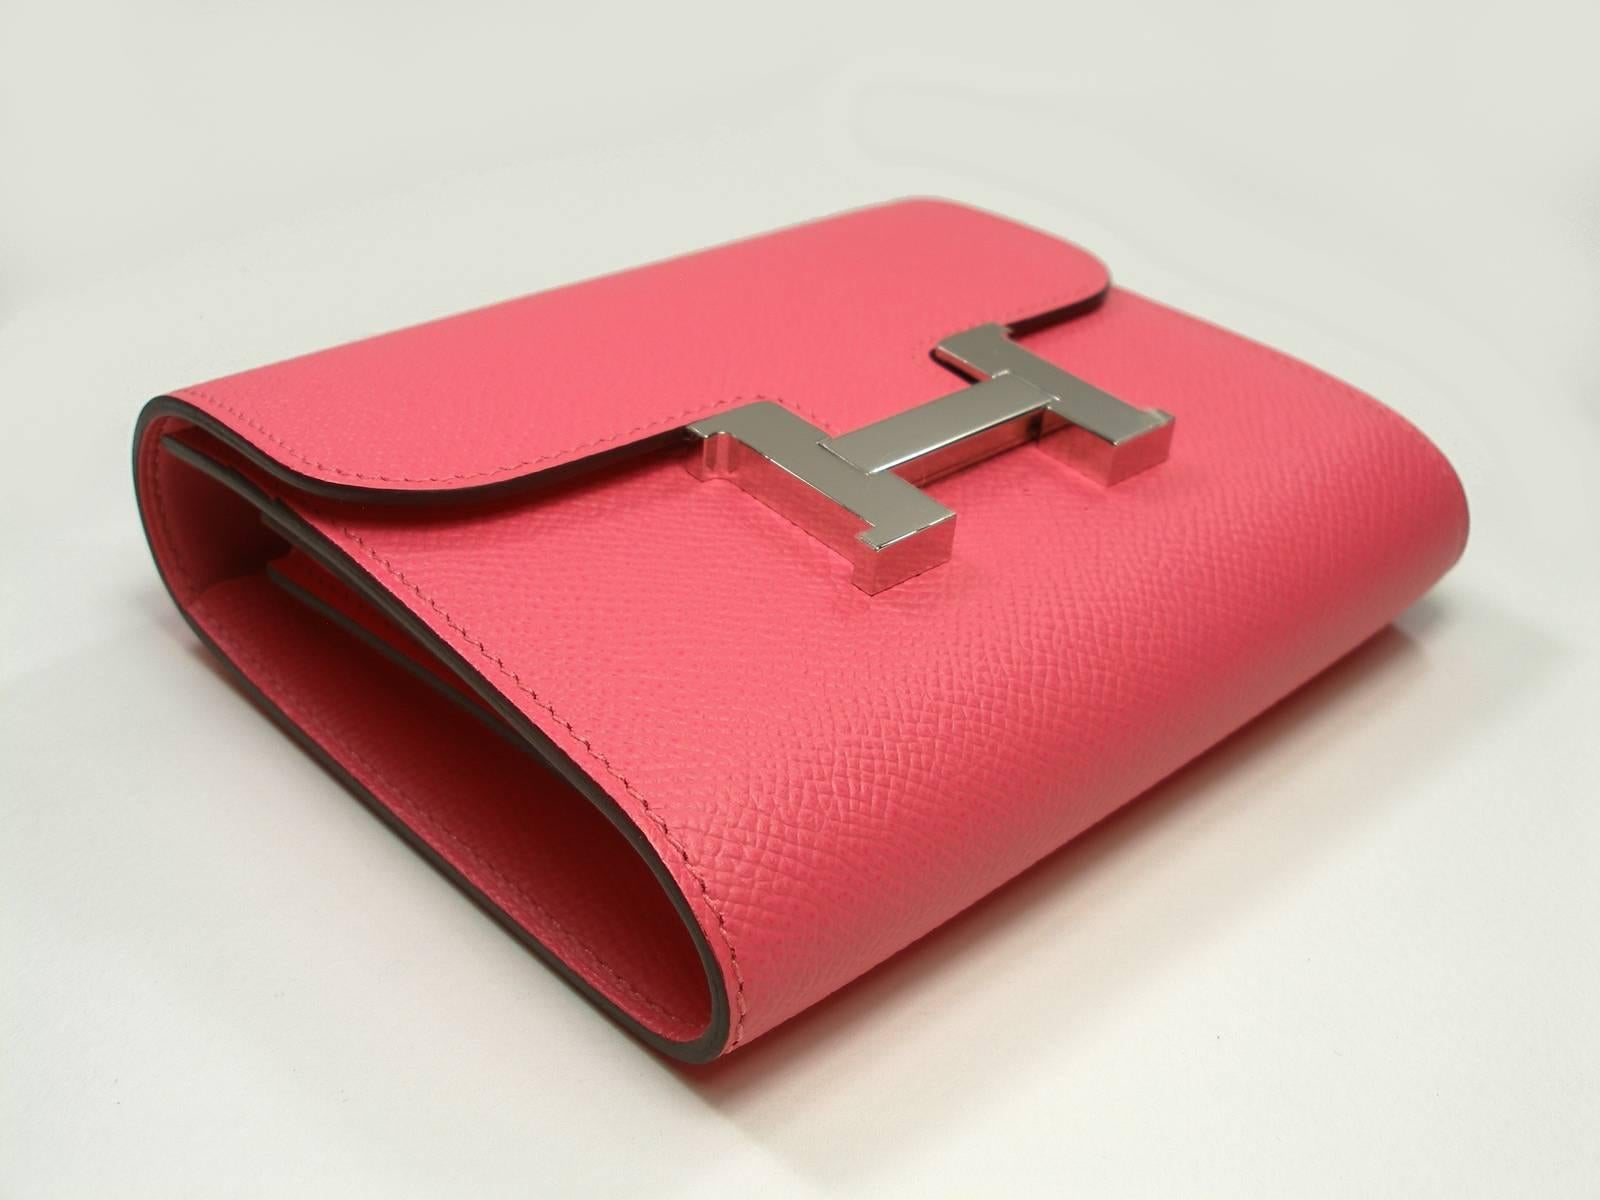 Hermes Pink Rose Lipstick Constance Wallet Compact
the iconic 